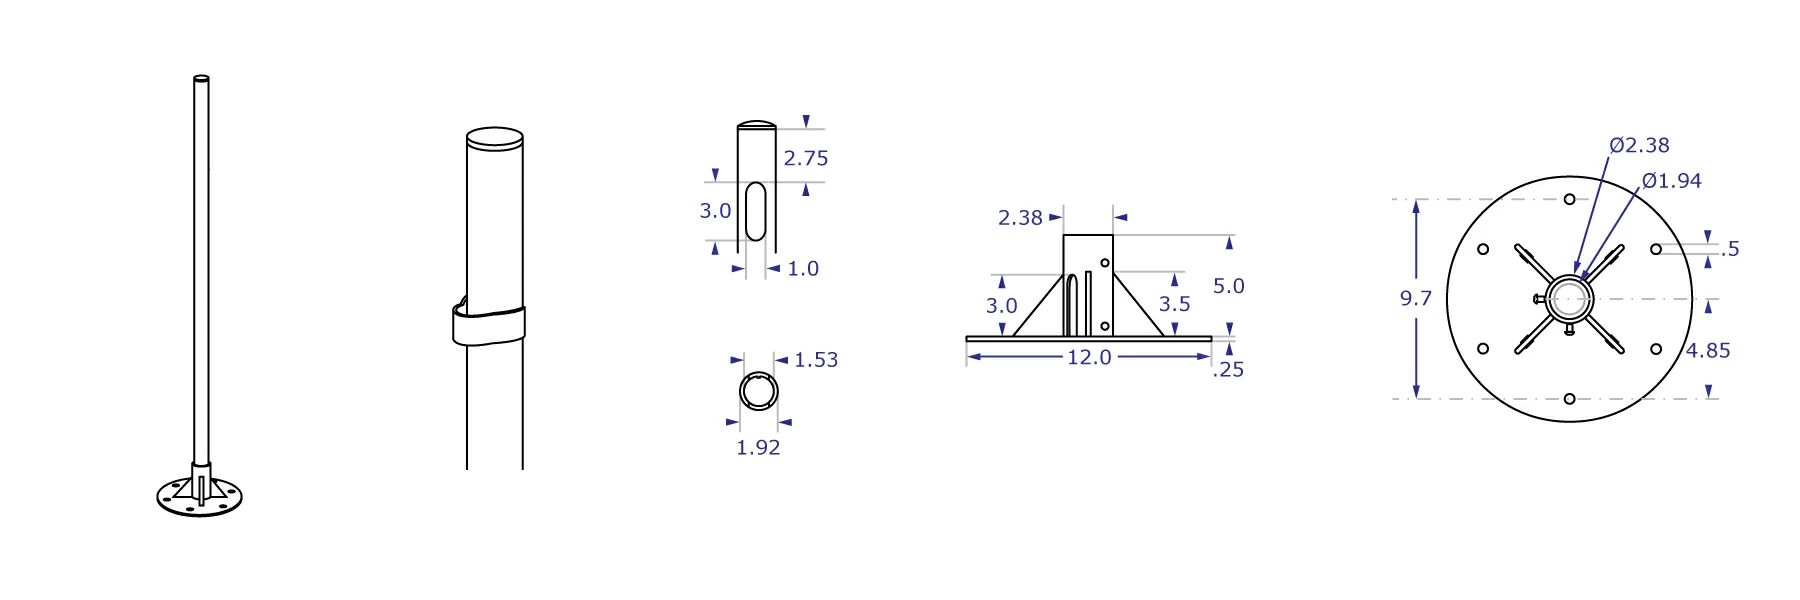 192CENTER pole floor stand specification drawings showing pole and base side and top views with measurements